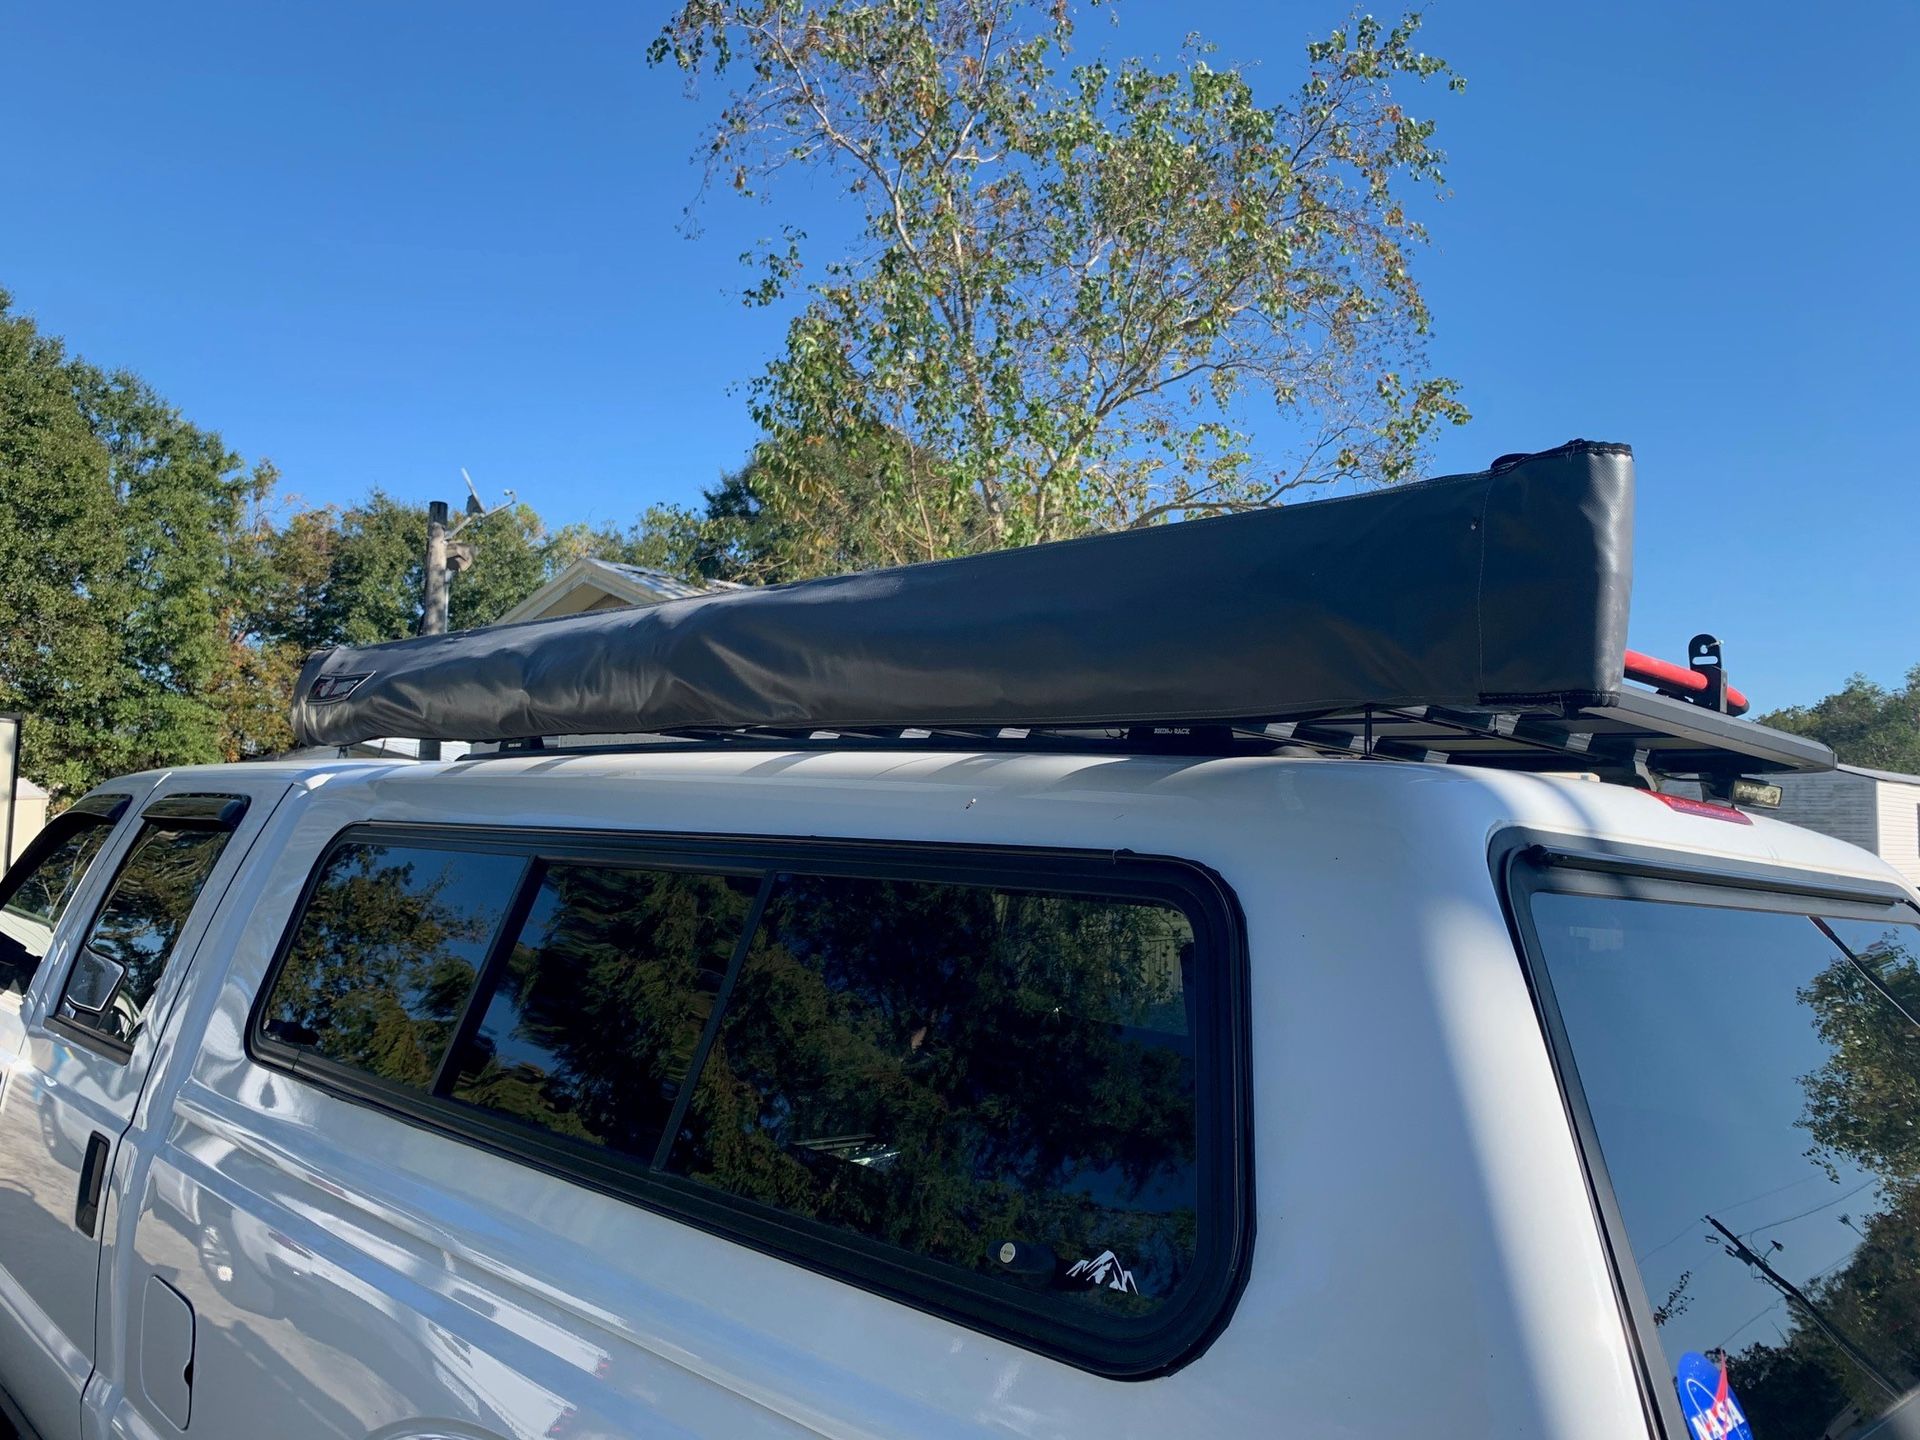 ATC - Camper Shell with Rhino Rack installed